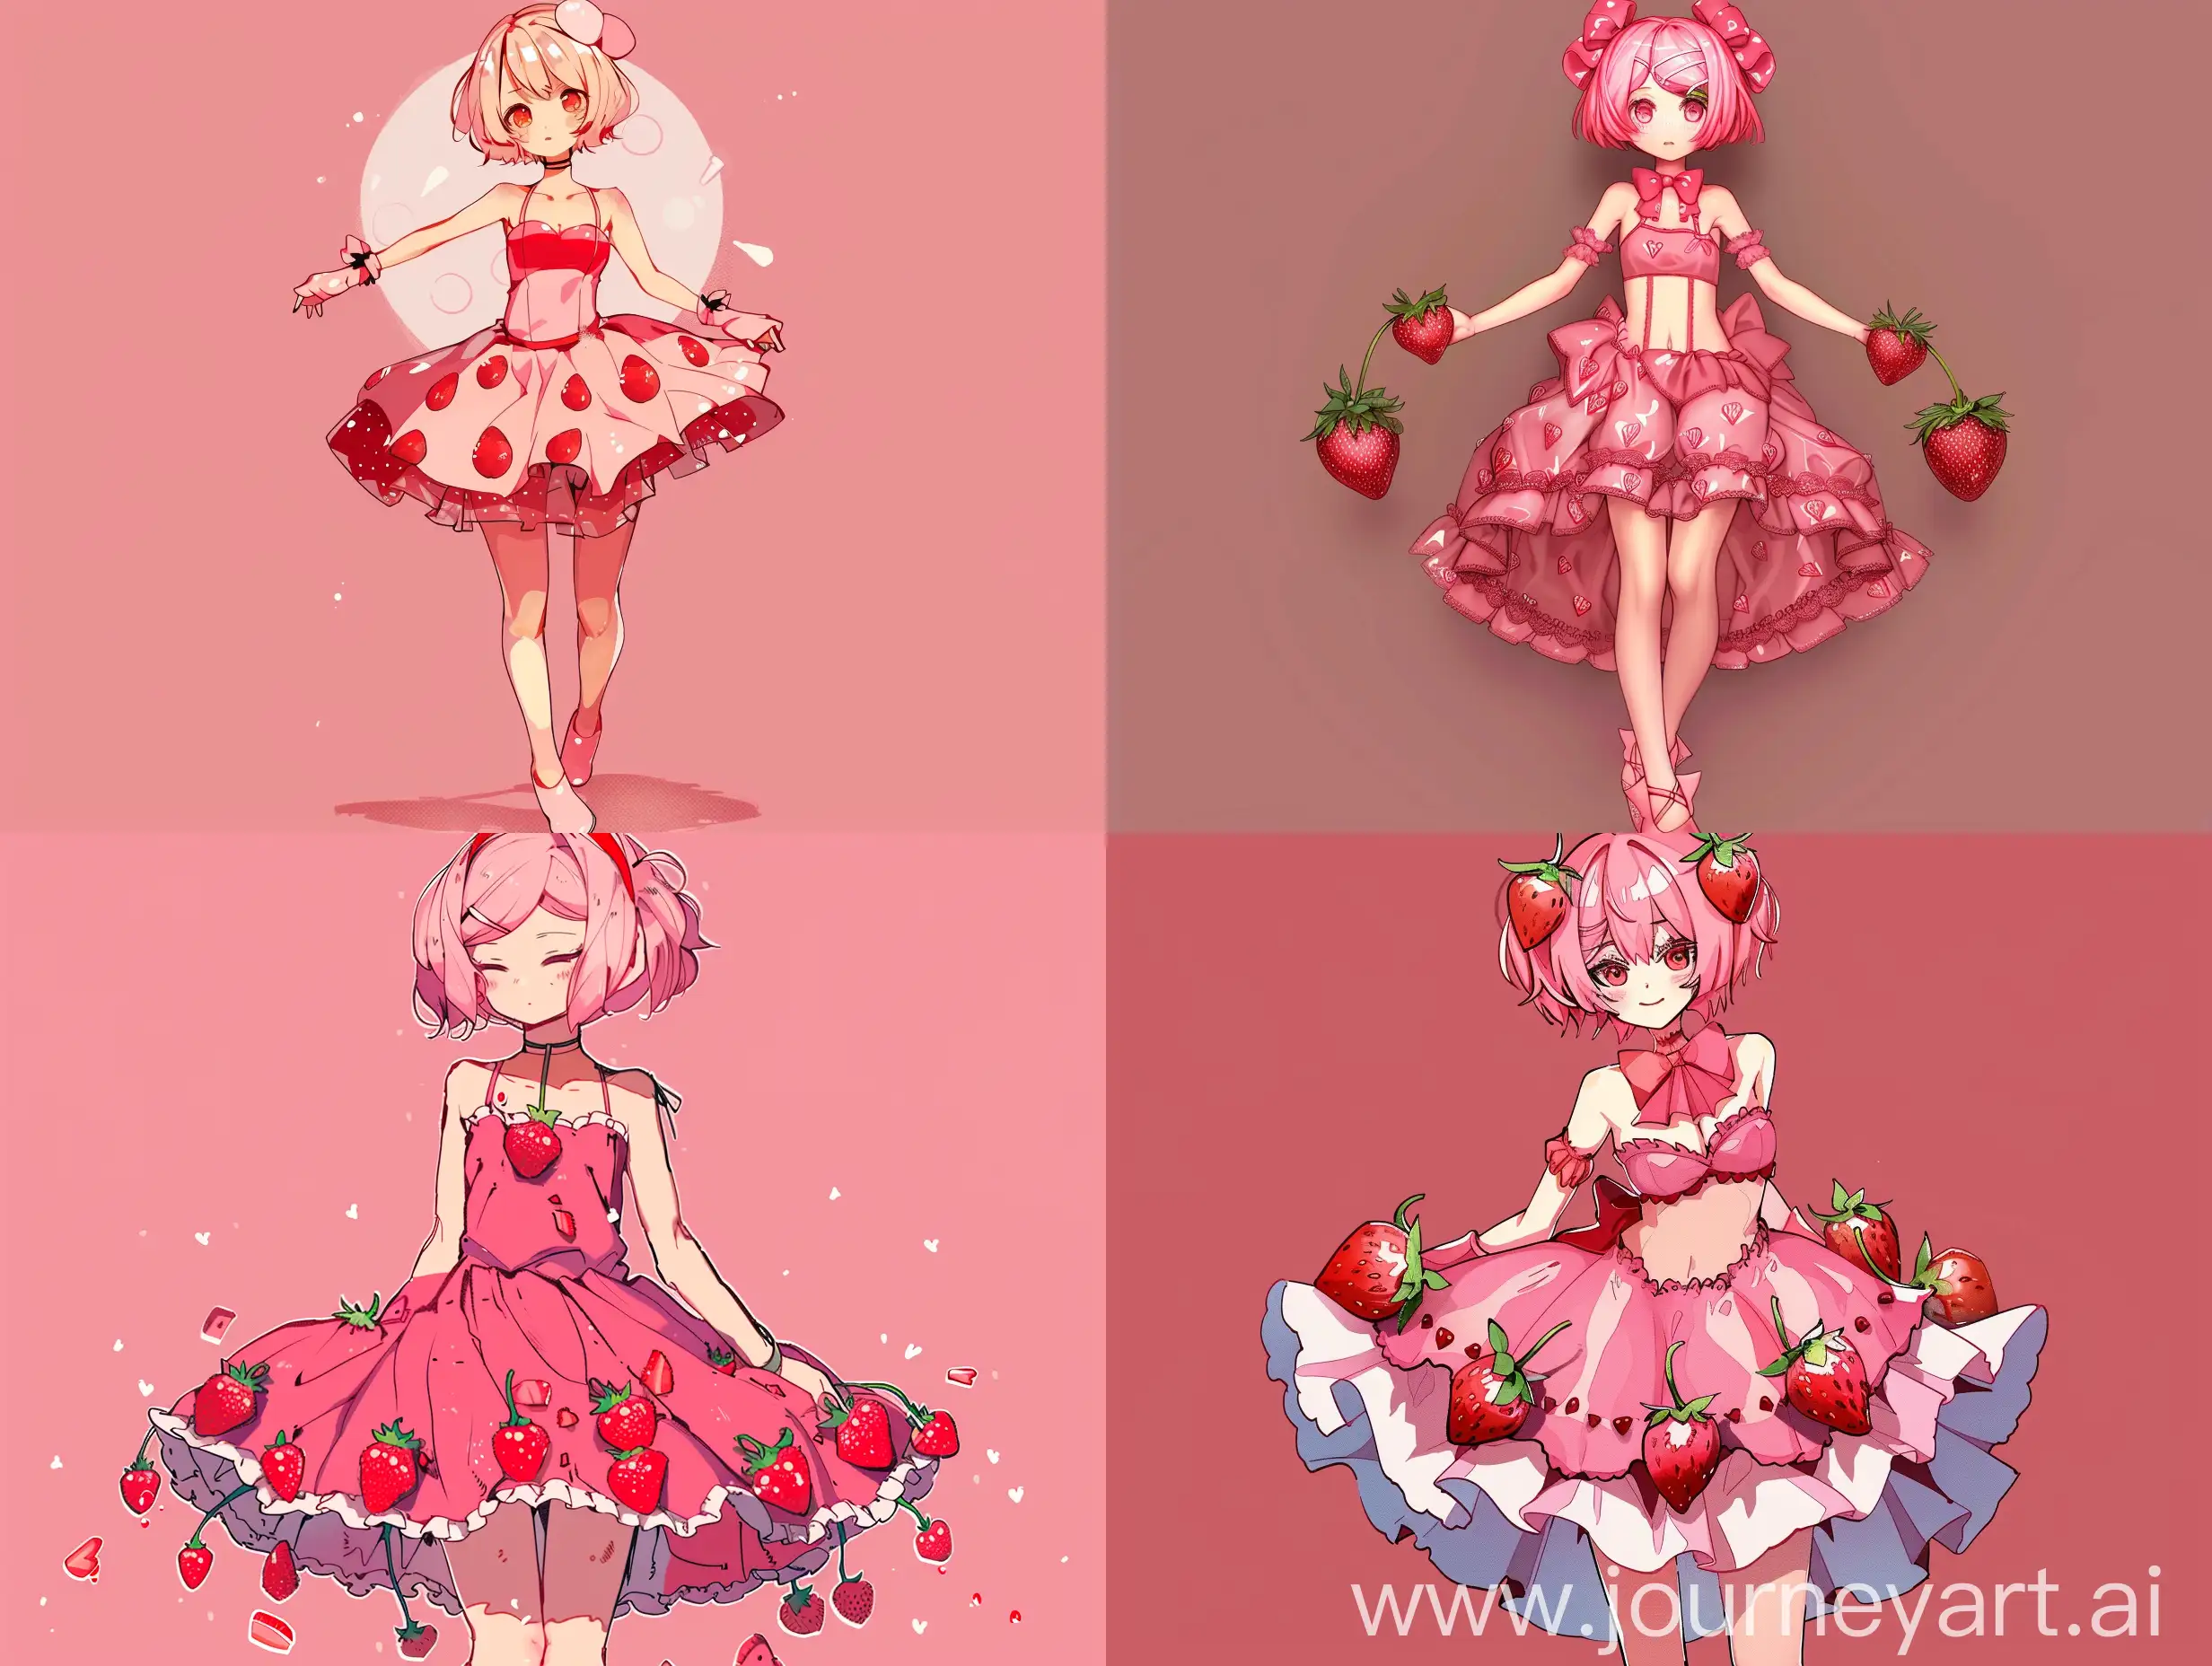 StrawberryThemed-Fashion-with-Rin-Kagamine-in-Pink-Aesthetic-Setting